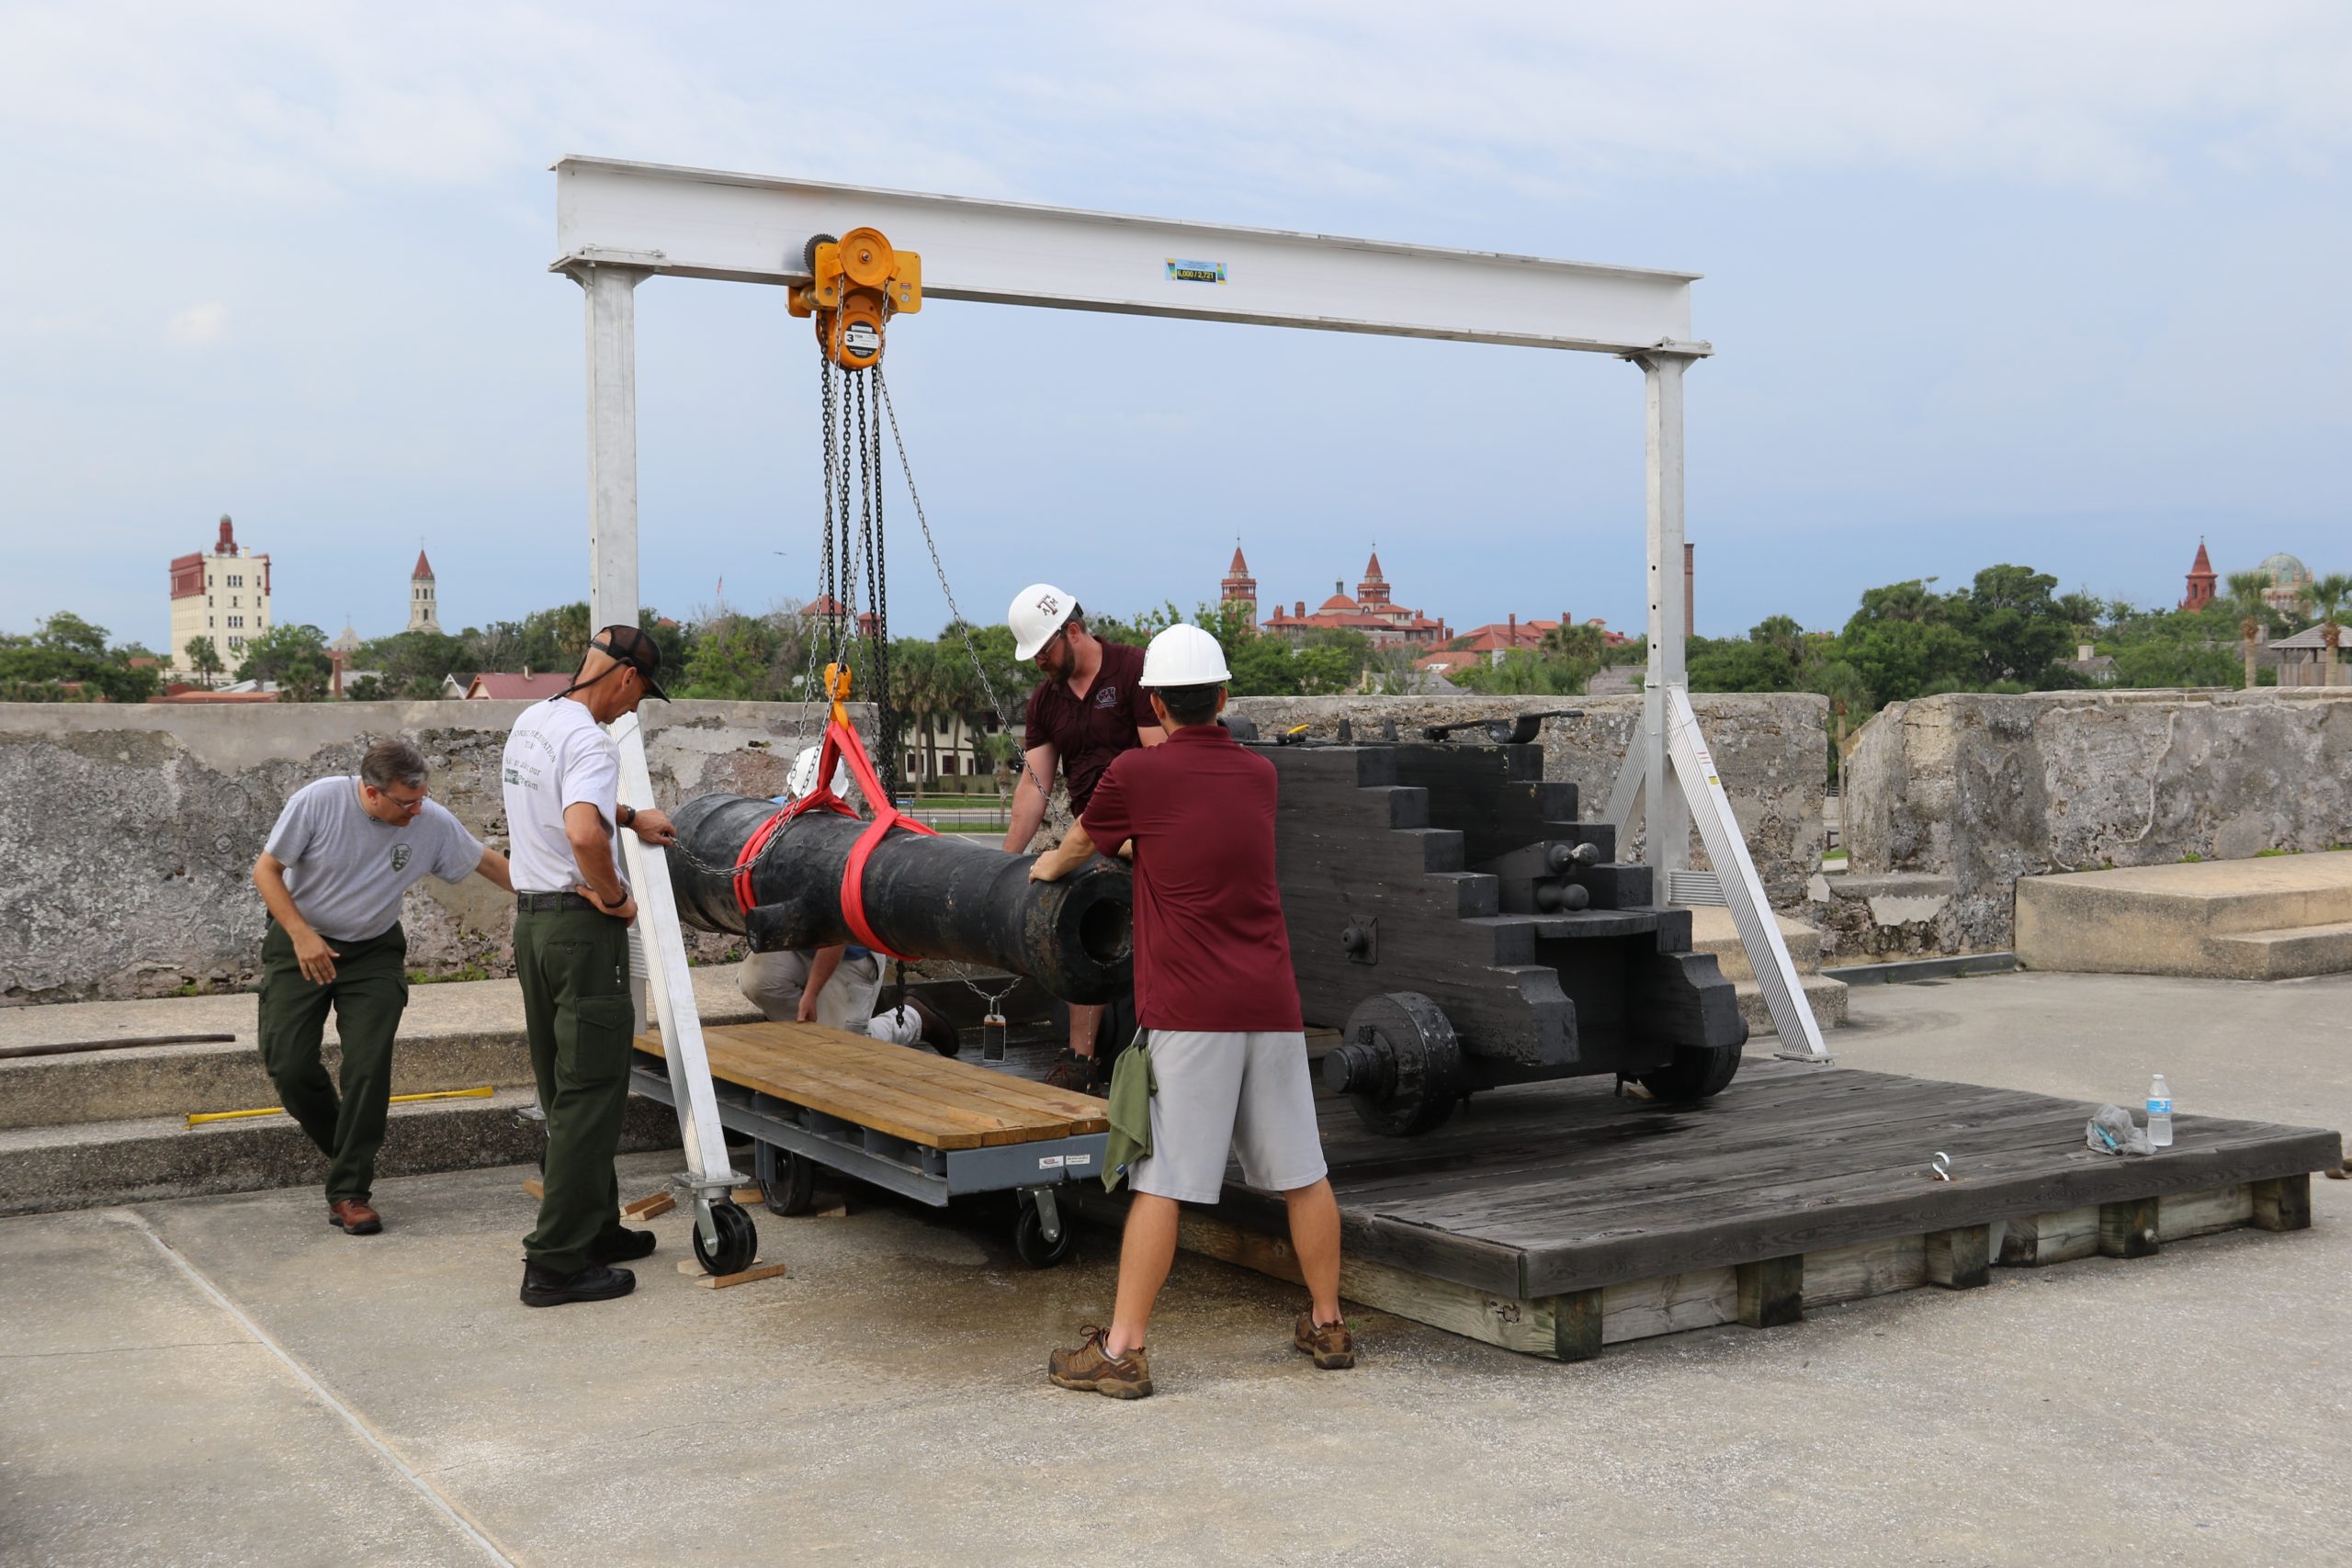 cannon being removed onto a holding cart